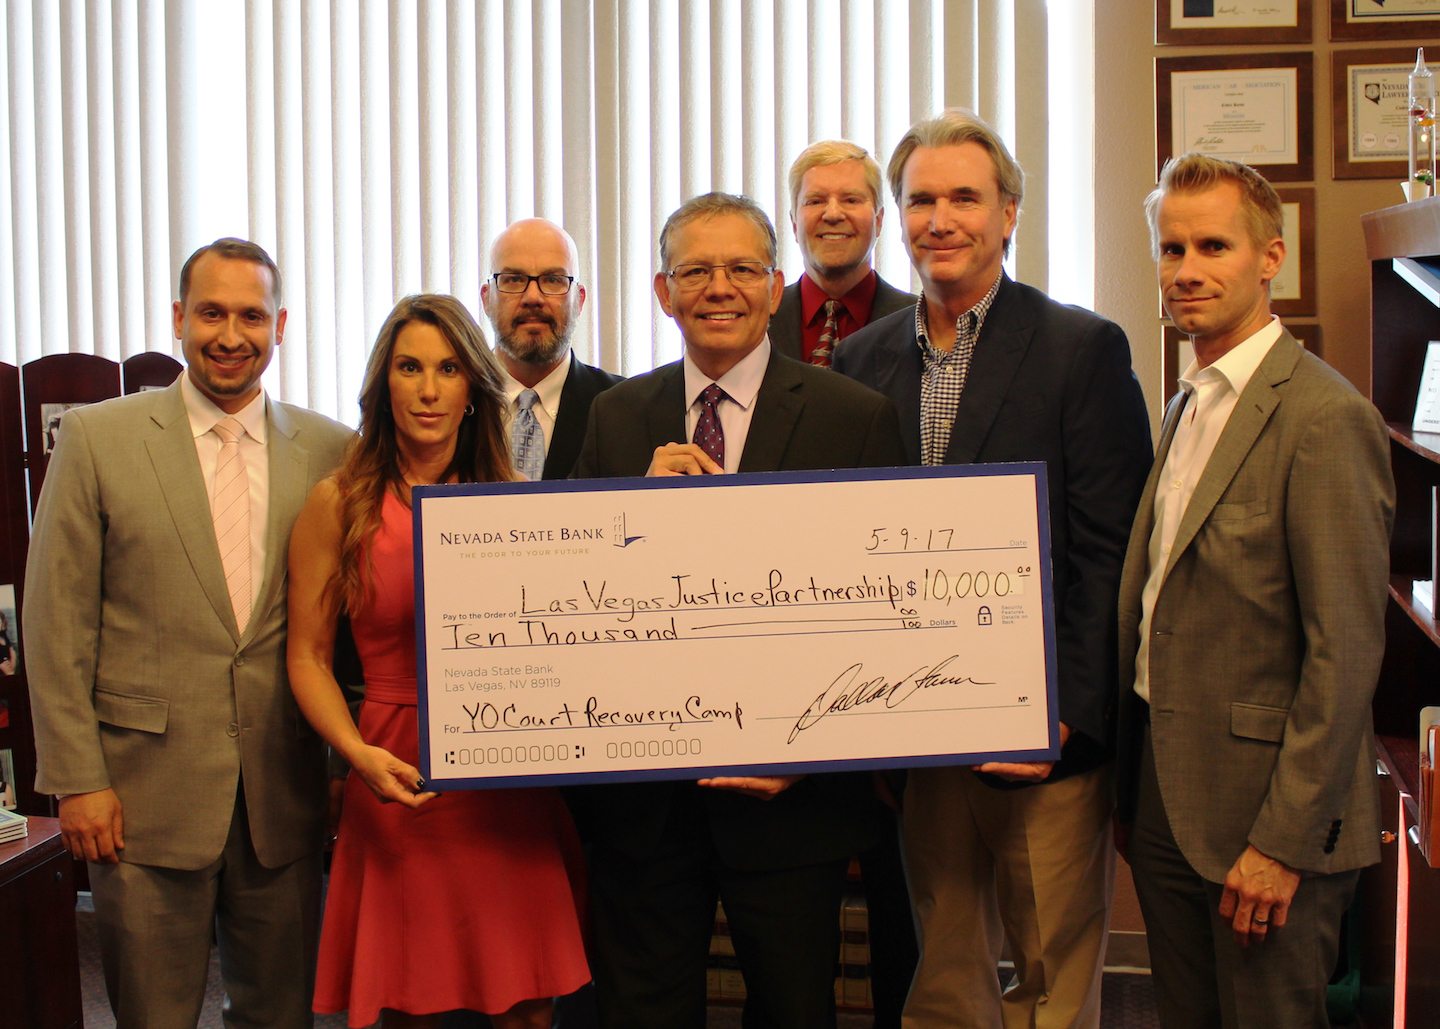 Nevada State Bank presents a $10,000 check as the first donation to the Las Vegas Justice Partnership.